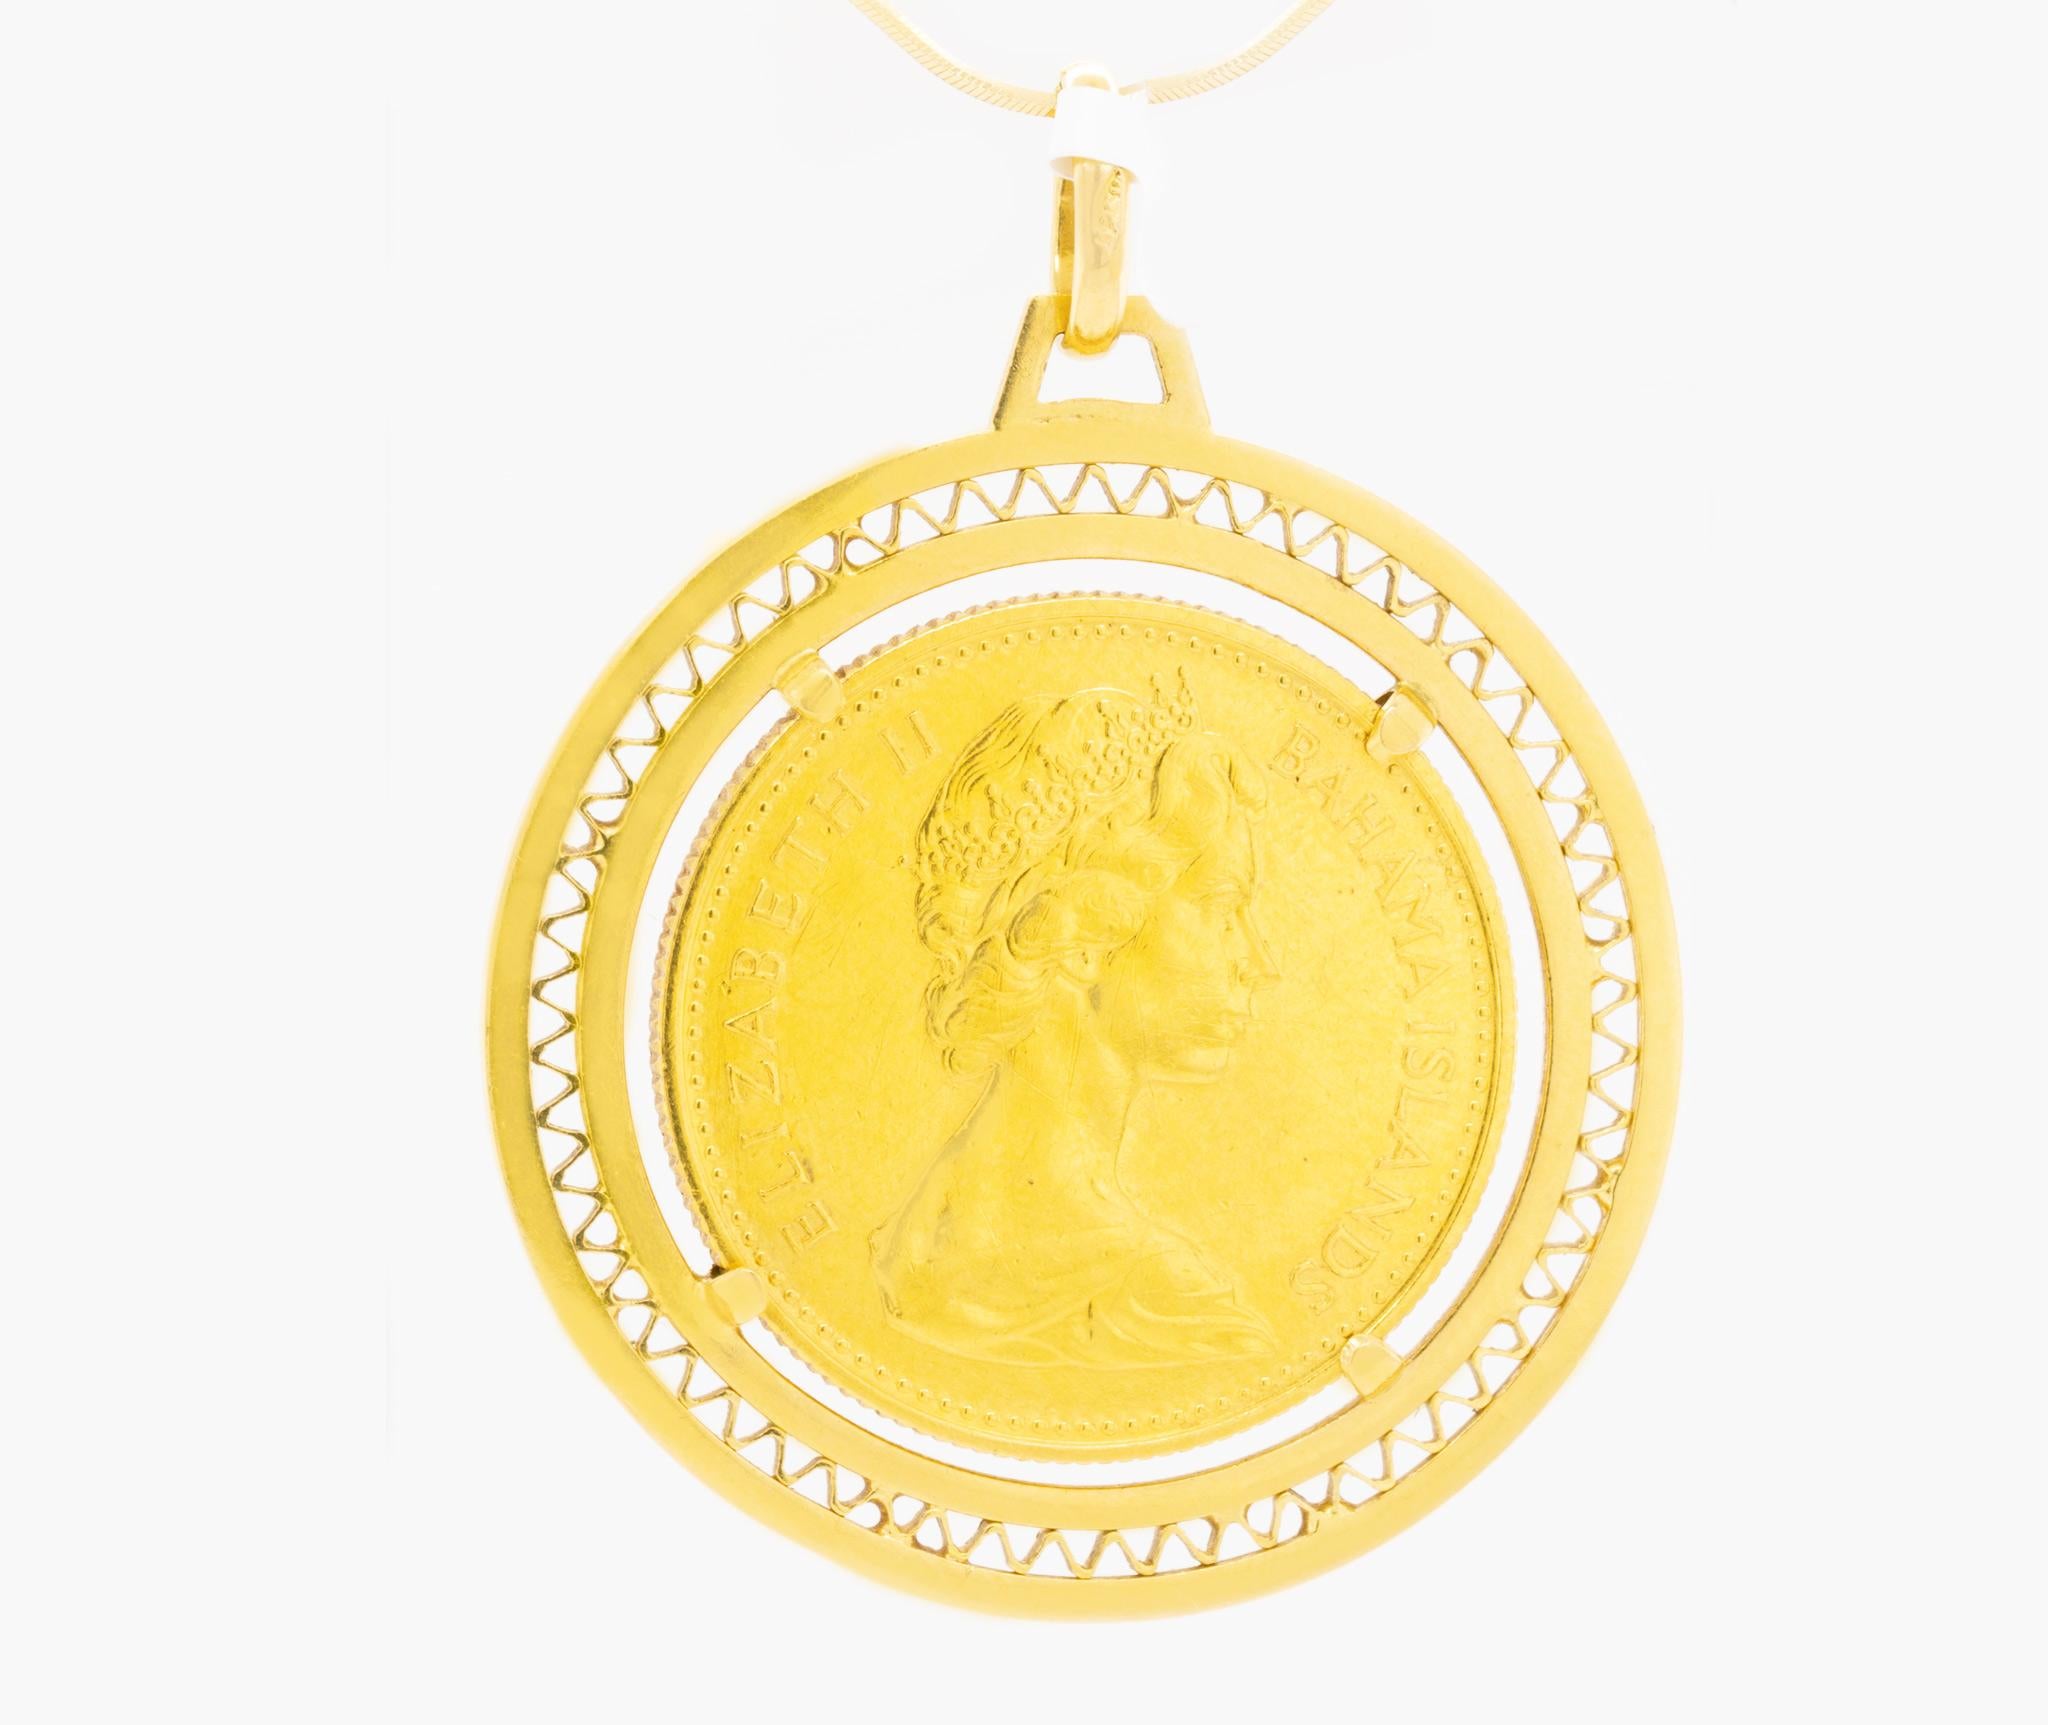 $50 English Gold Coin
Weigth: 27 Grams
Metal: 14K Gold, 24K Gold
Dimensions: 39 x 48 mm